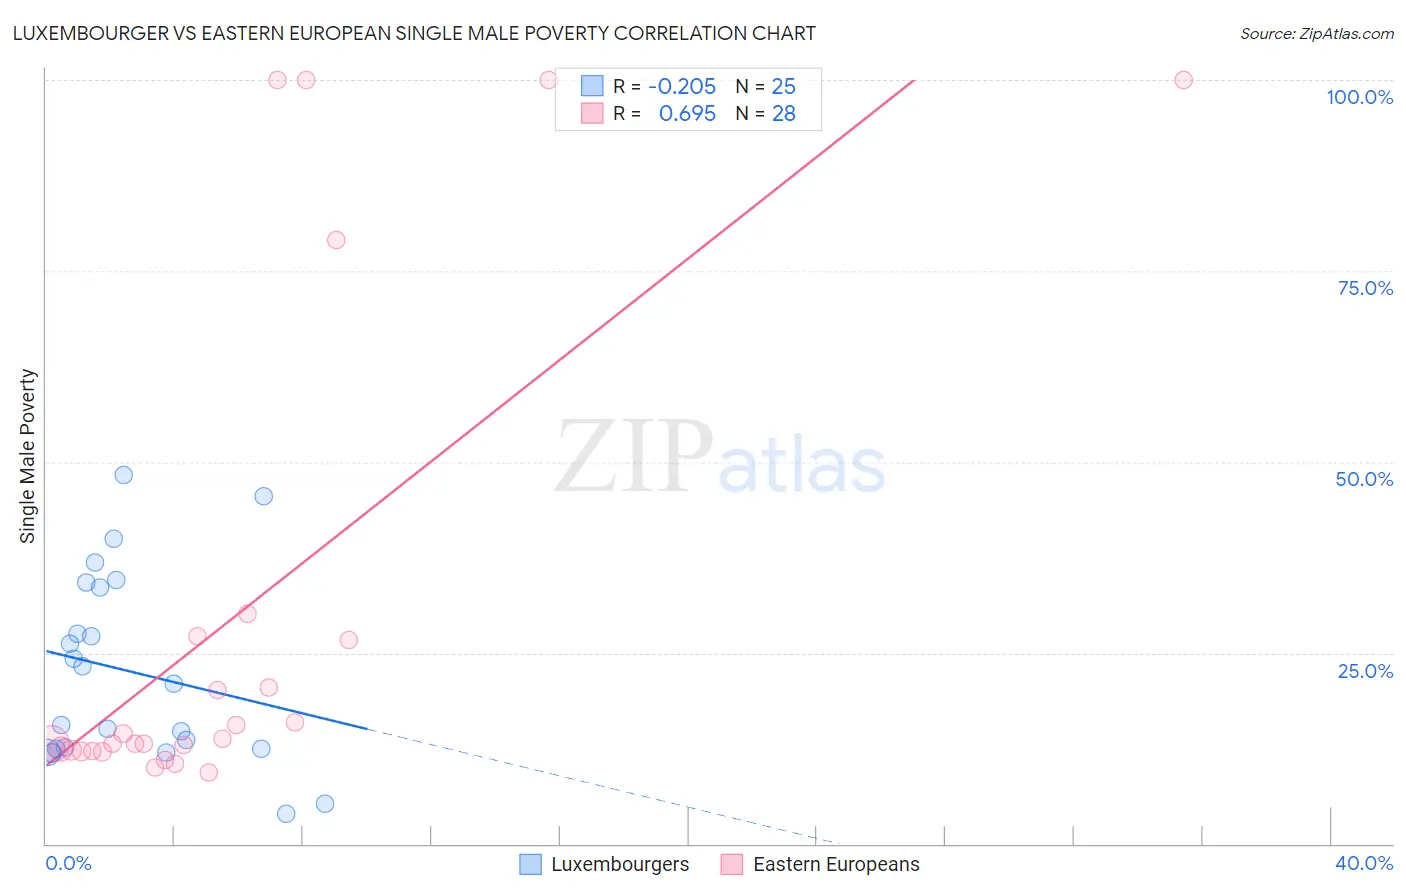 Luxembourger vs Eastern European Single Male Poverty